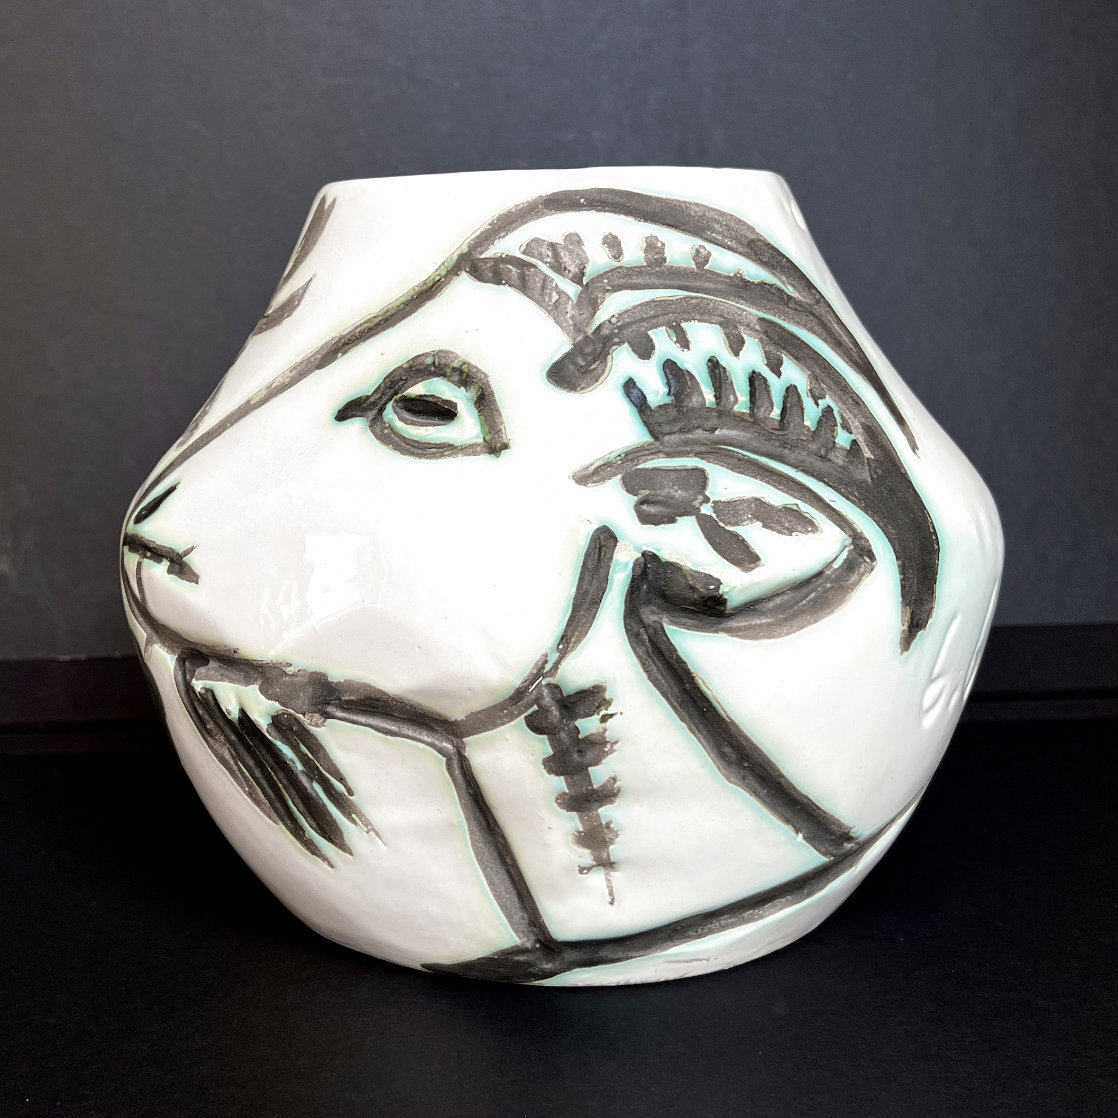 Vase with Goats Ceramic Sculpture 1952 9 in Sculpture by Pablo Picasso